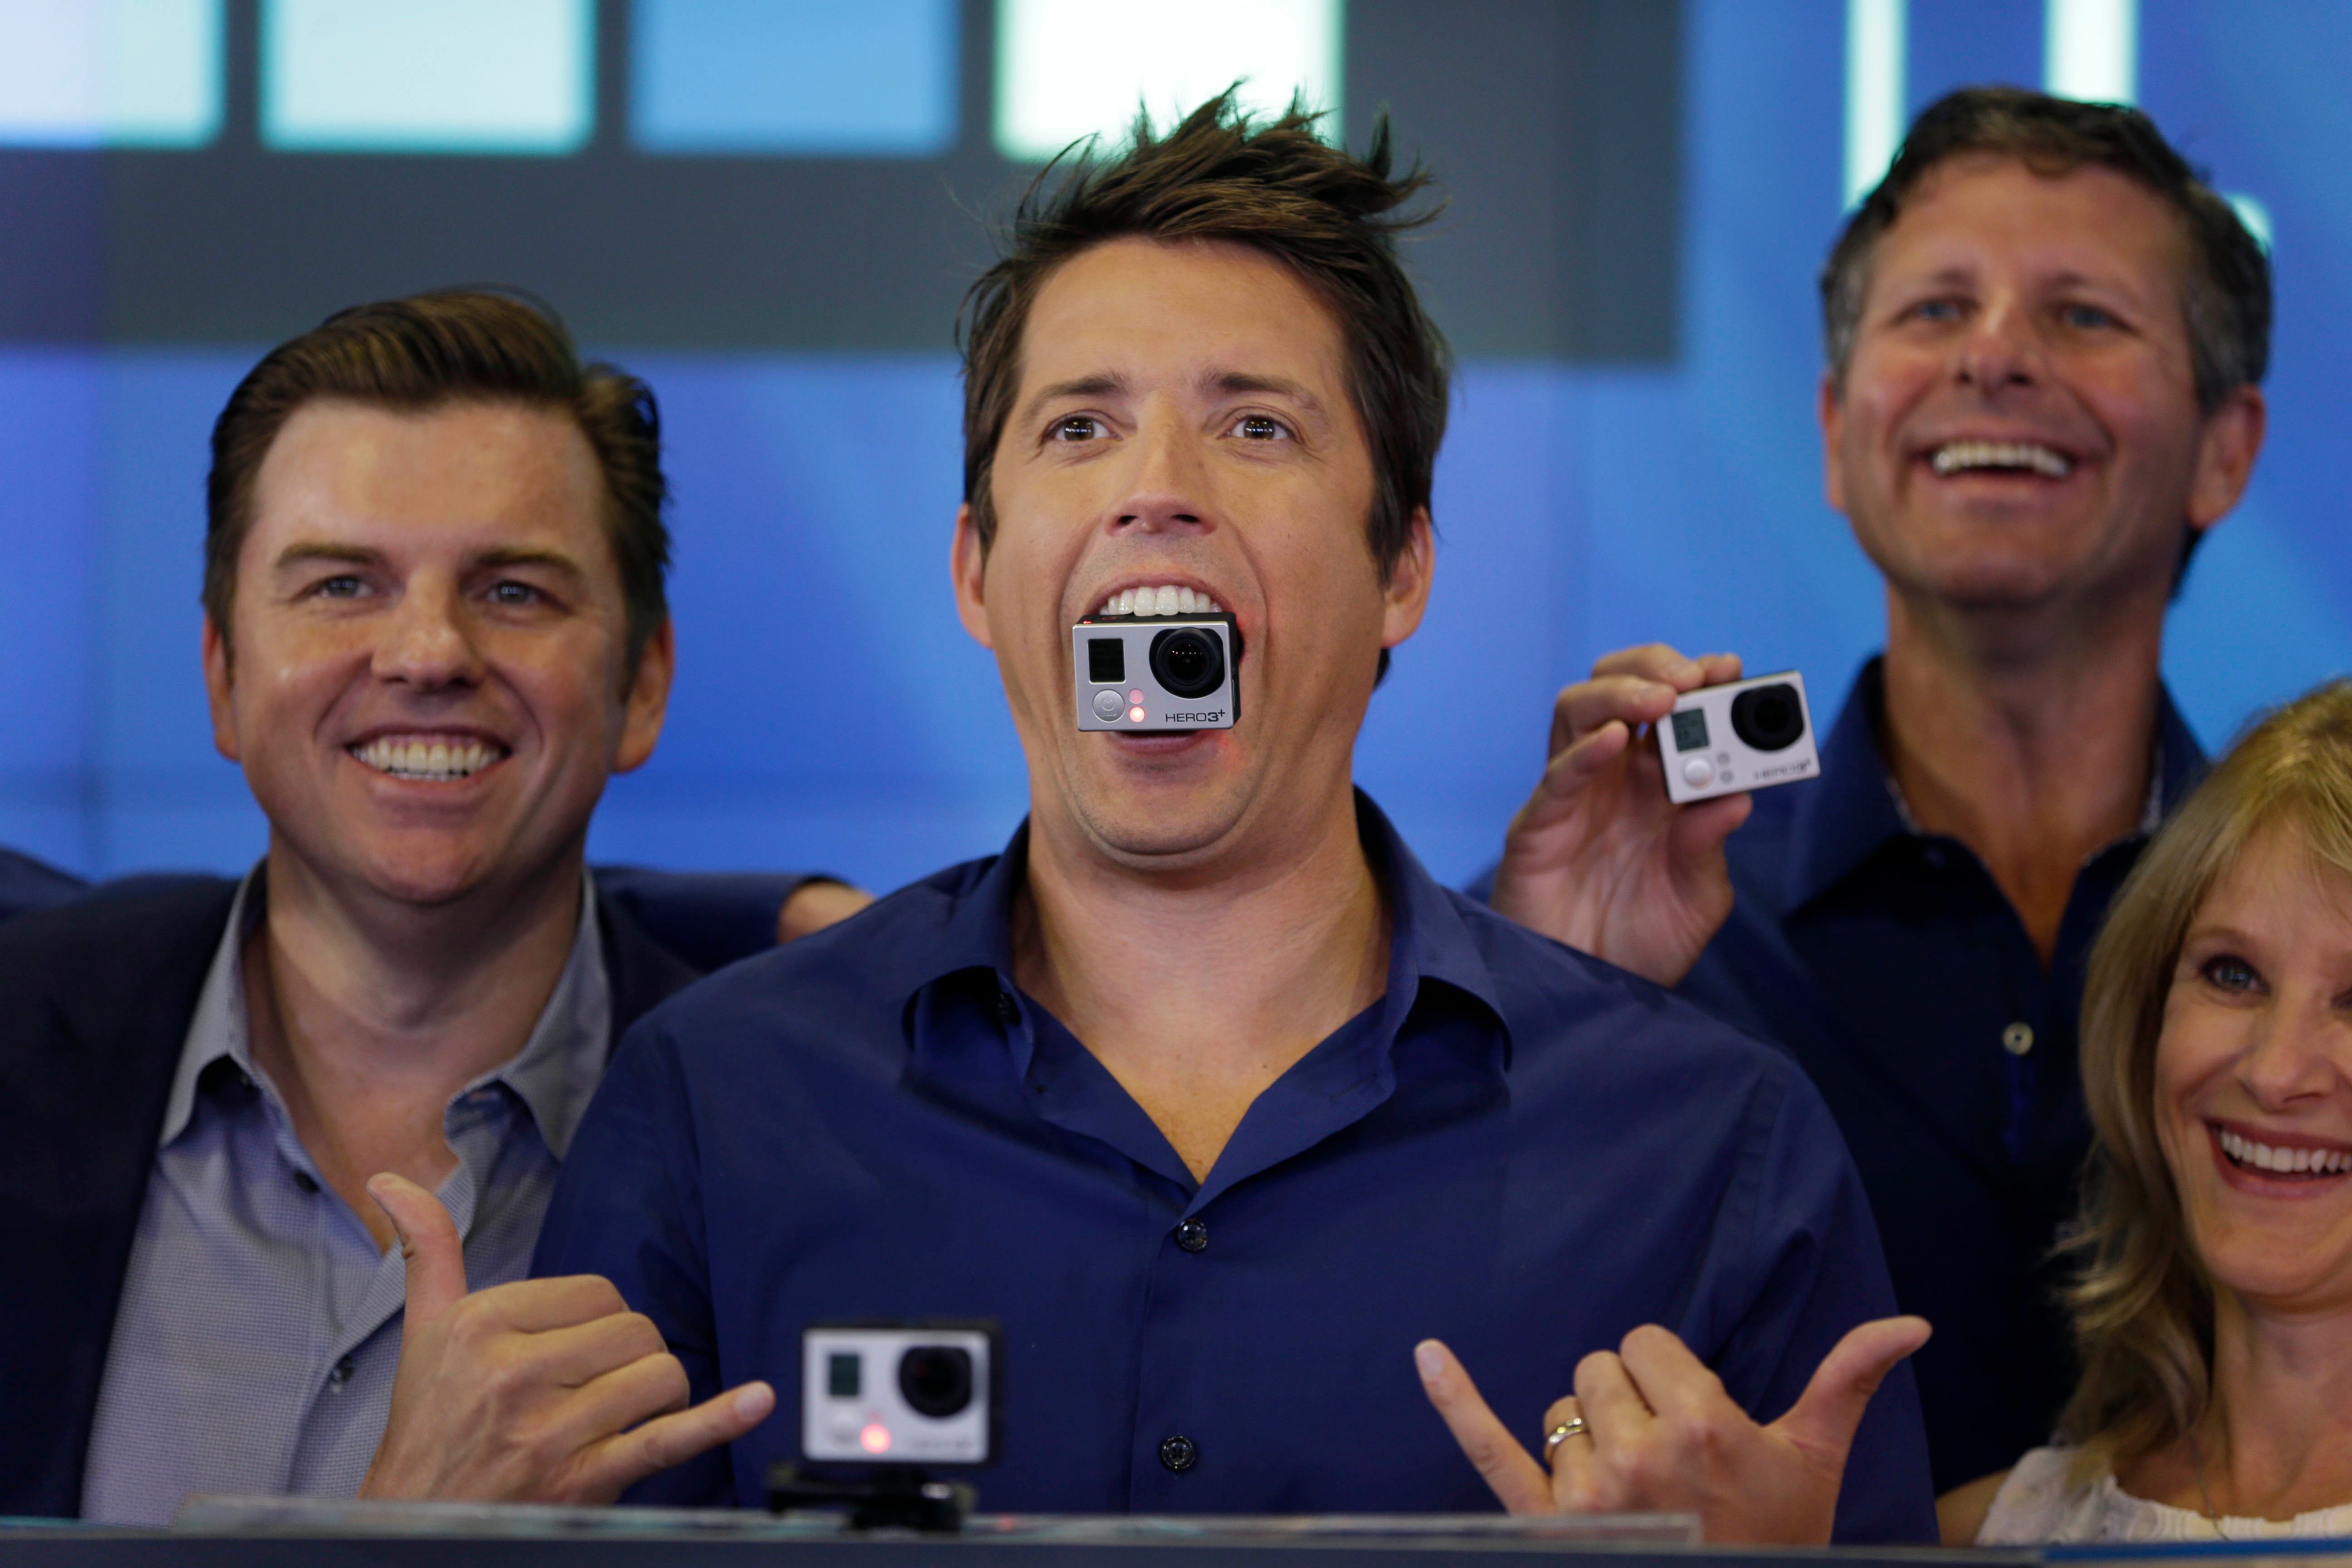 GoPro's CEO Nick Woodman holds a GoPro camera in his mouth as he celebrates his company's IPO at the Nasdaq MarketSite in New York, June 26, 2014. (Seth Wenig—AP)